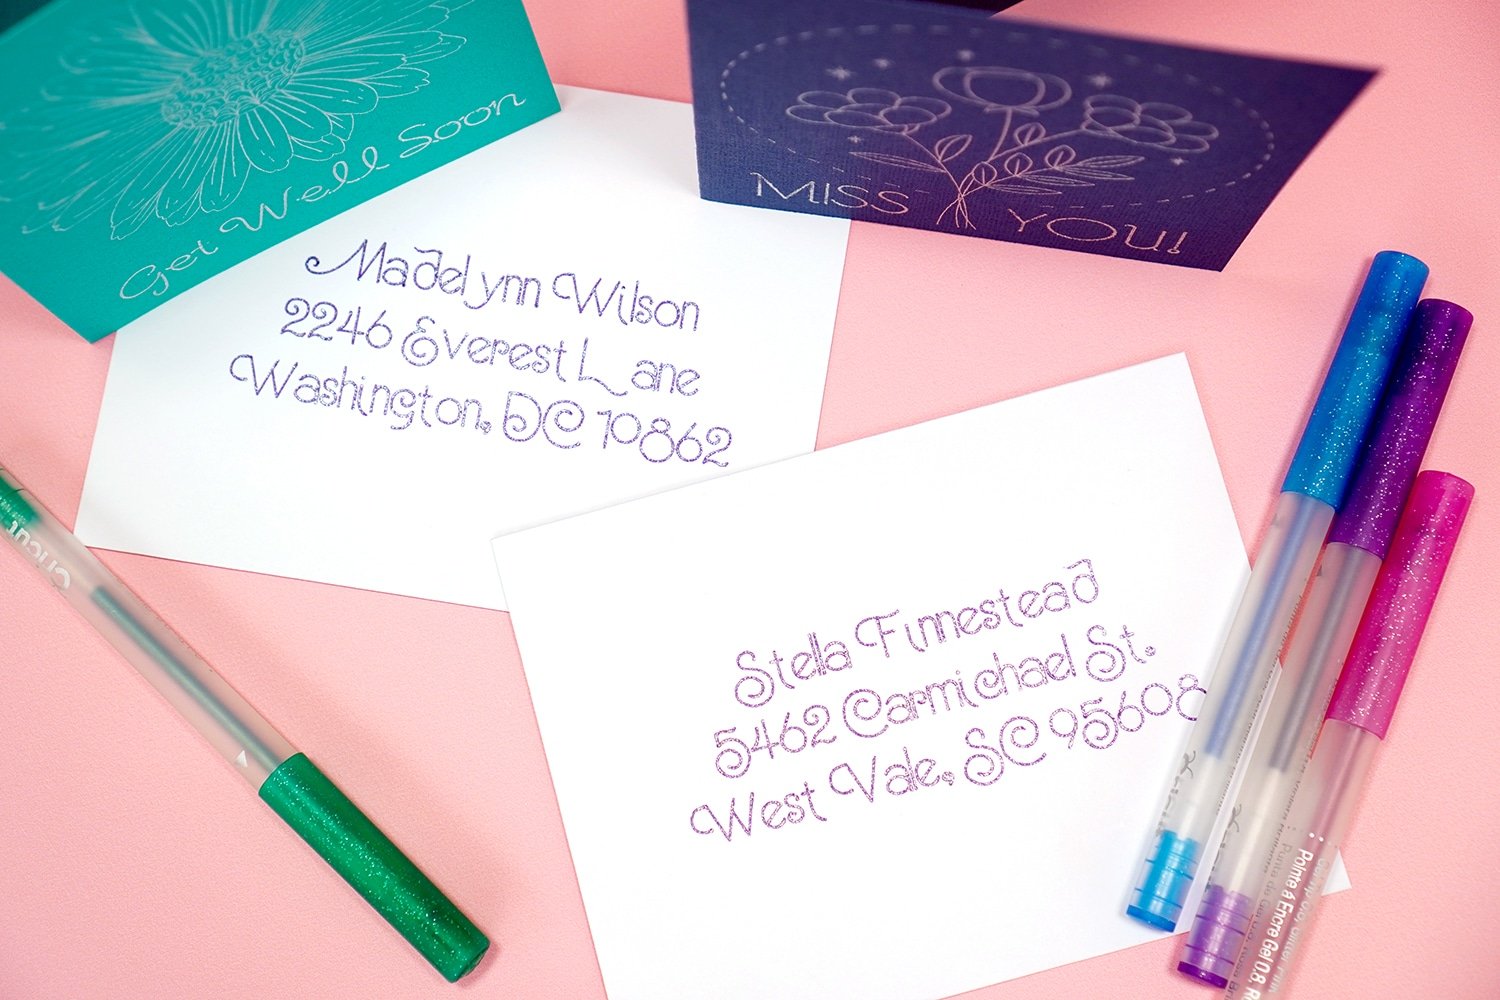 Glitter addressed white envelopes on pink background with glitter pens and cards